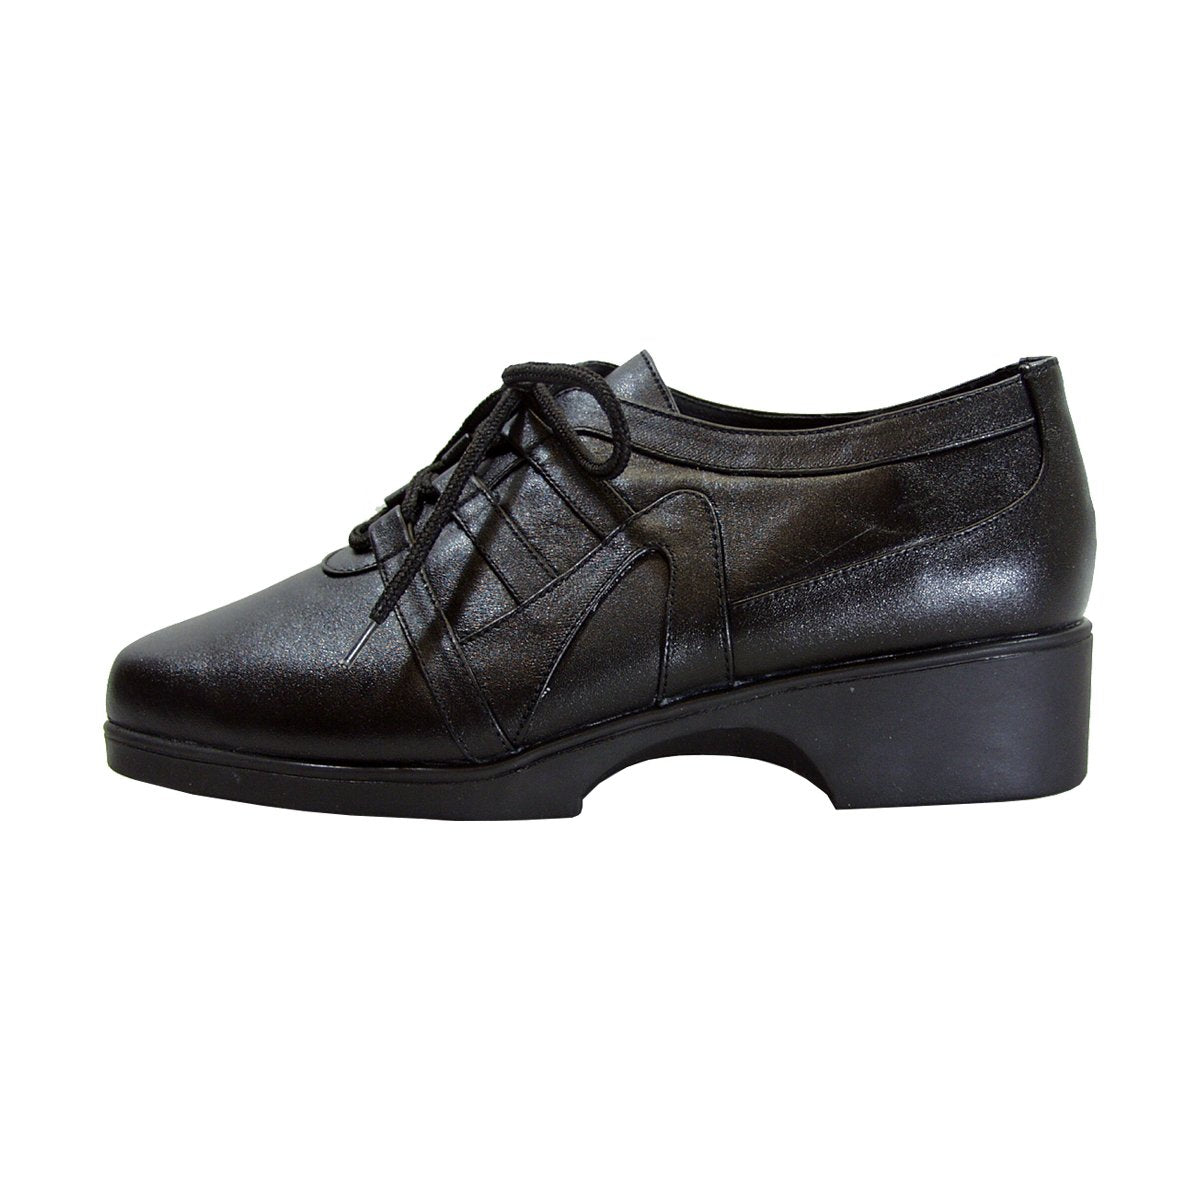 24 HOUR COMFORT Carmel Women's Wide Width Leather Lace-Up Shoes